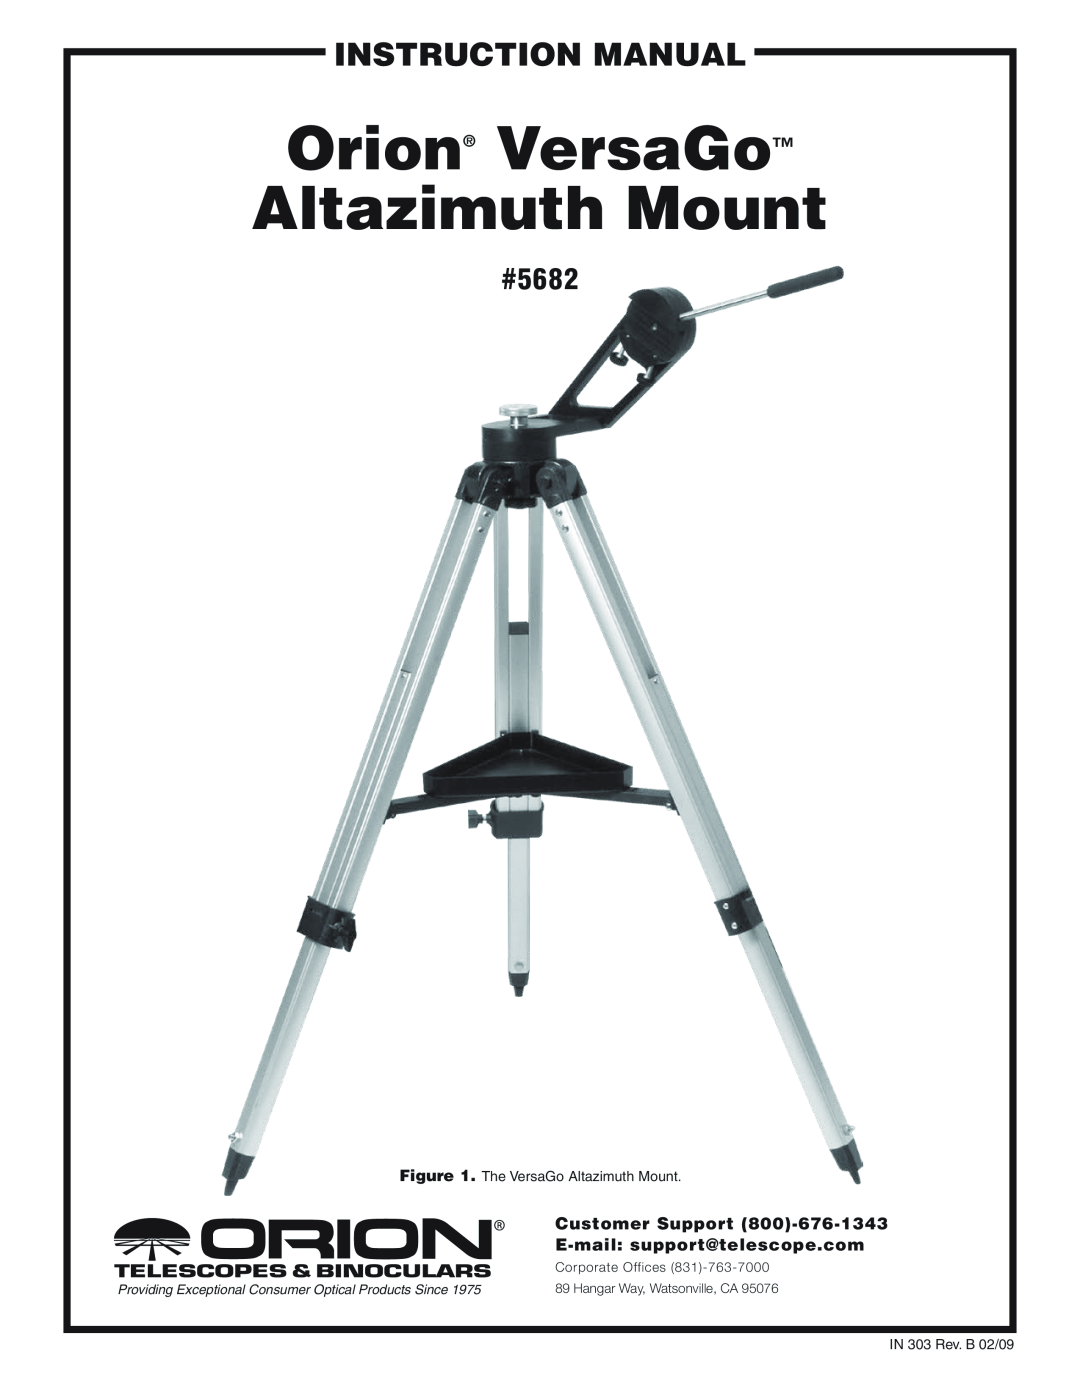 Orion #5682 instruction manual Customer Support 800‑676-1343, E-mail support@telescope.com, Orion VersaGo Altazimuth Mount 